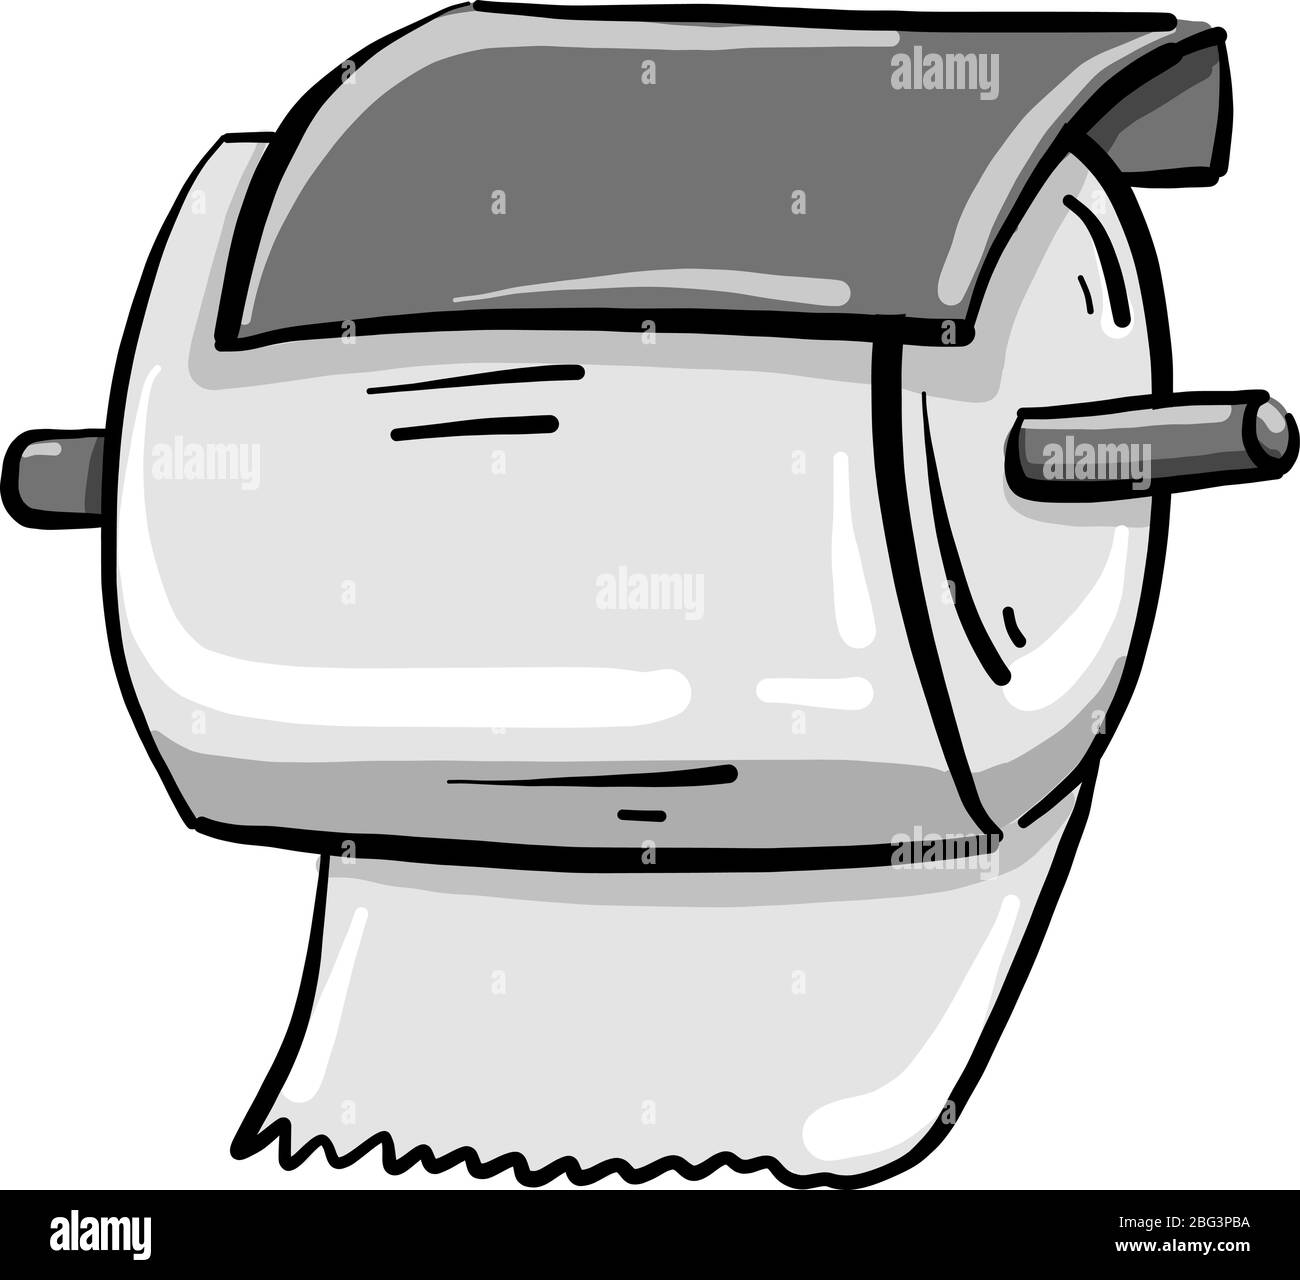 Toilet paper drawing, illustration, vector on white background Stock Vector